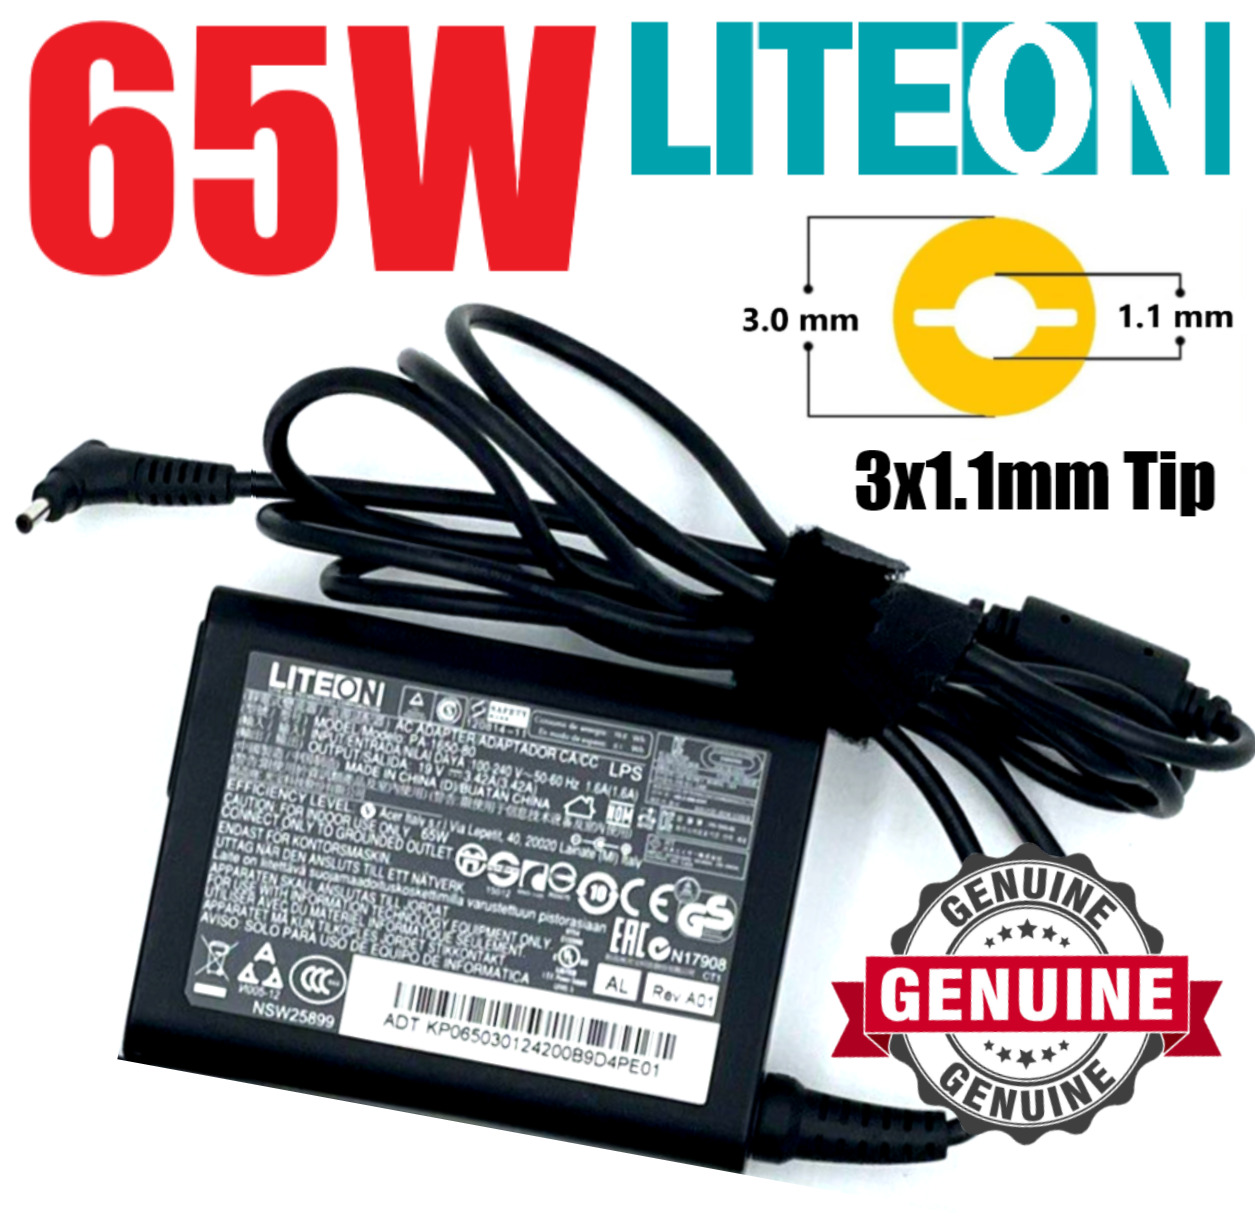 Genuine LiteOn 65W 3x1.1mm AC Adapter Charger 19V For Samsung Series 9 Notebook